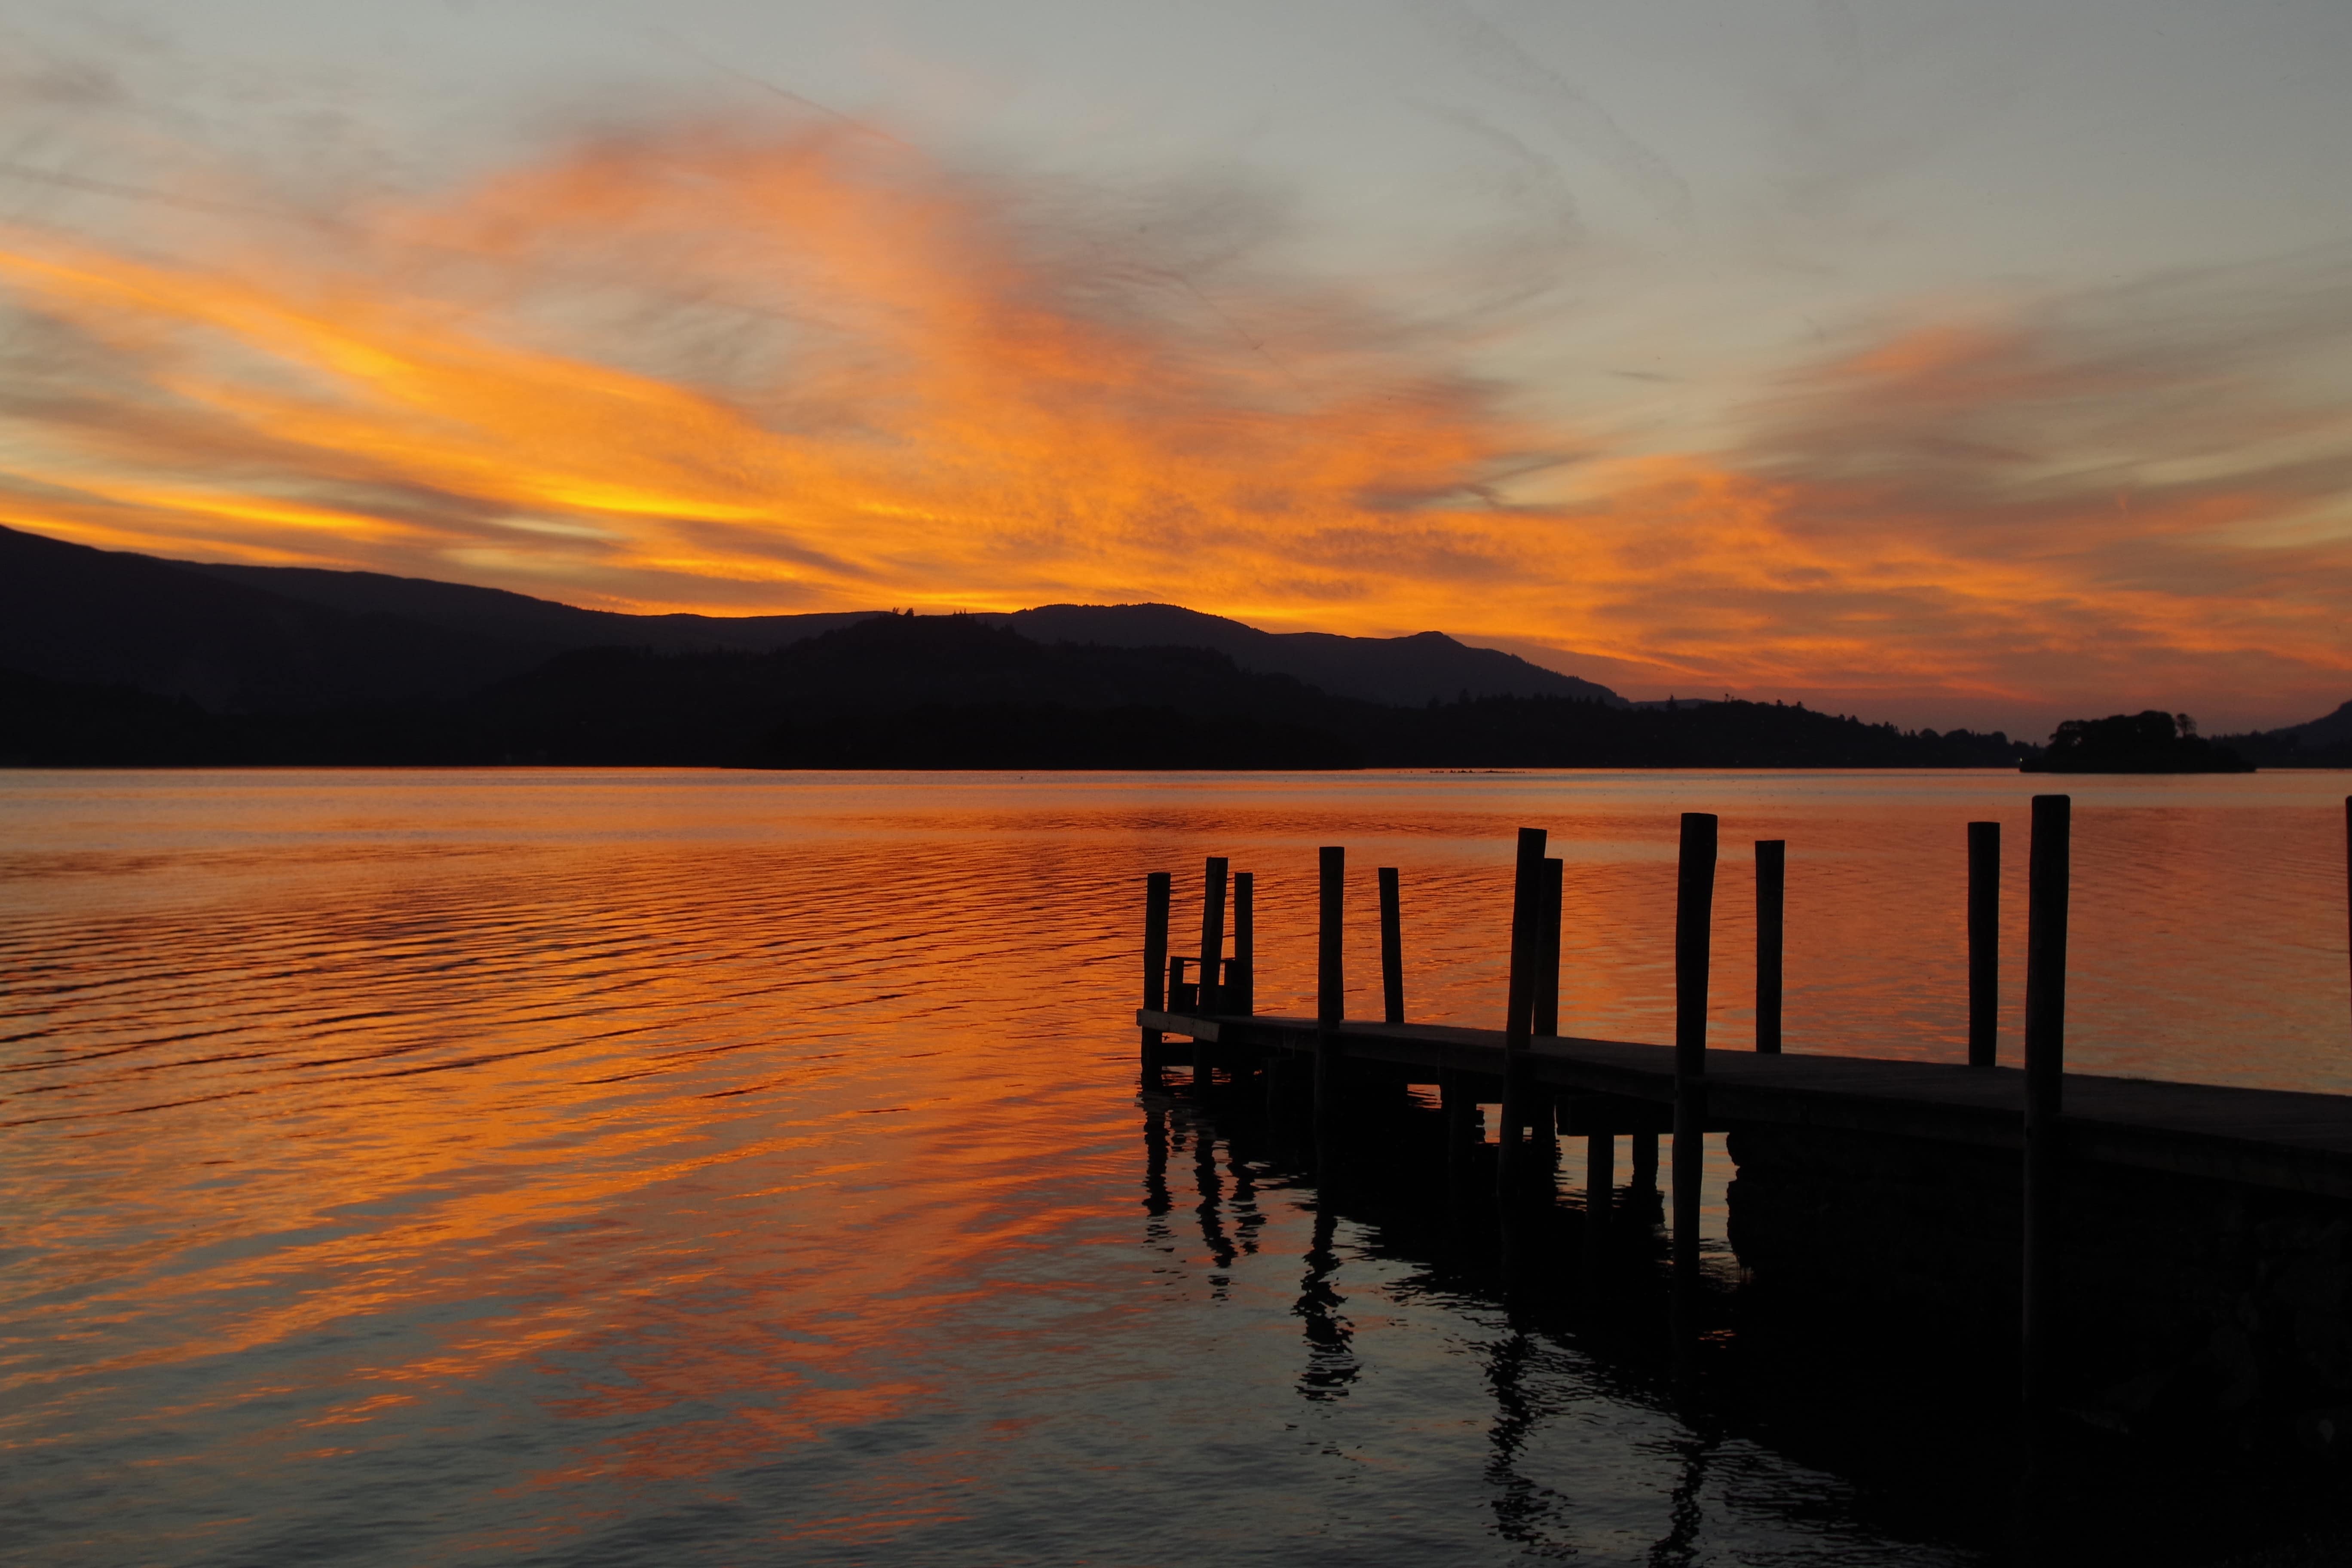 Fabulous holiday ideas for your Lake District breaks